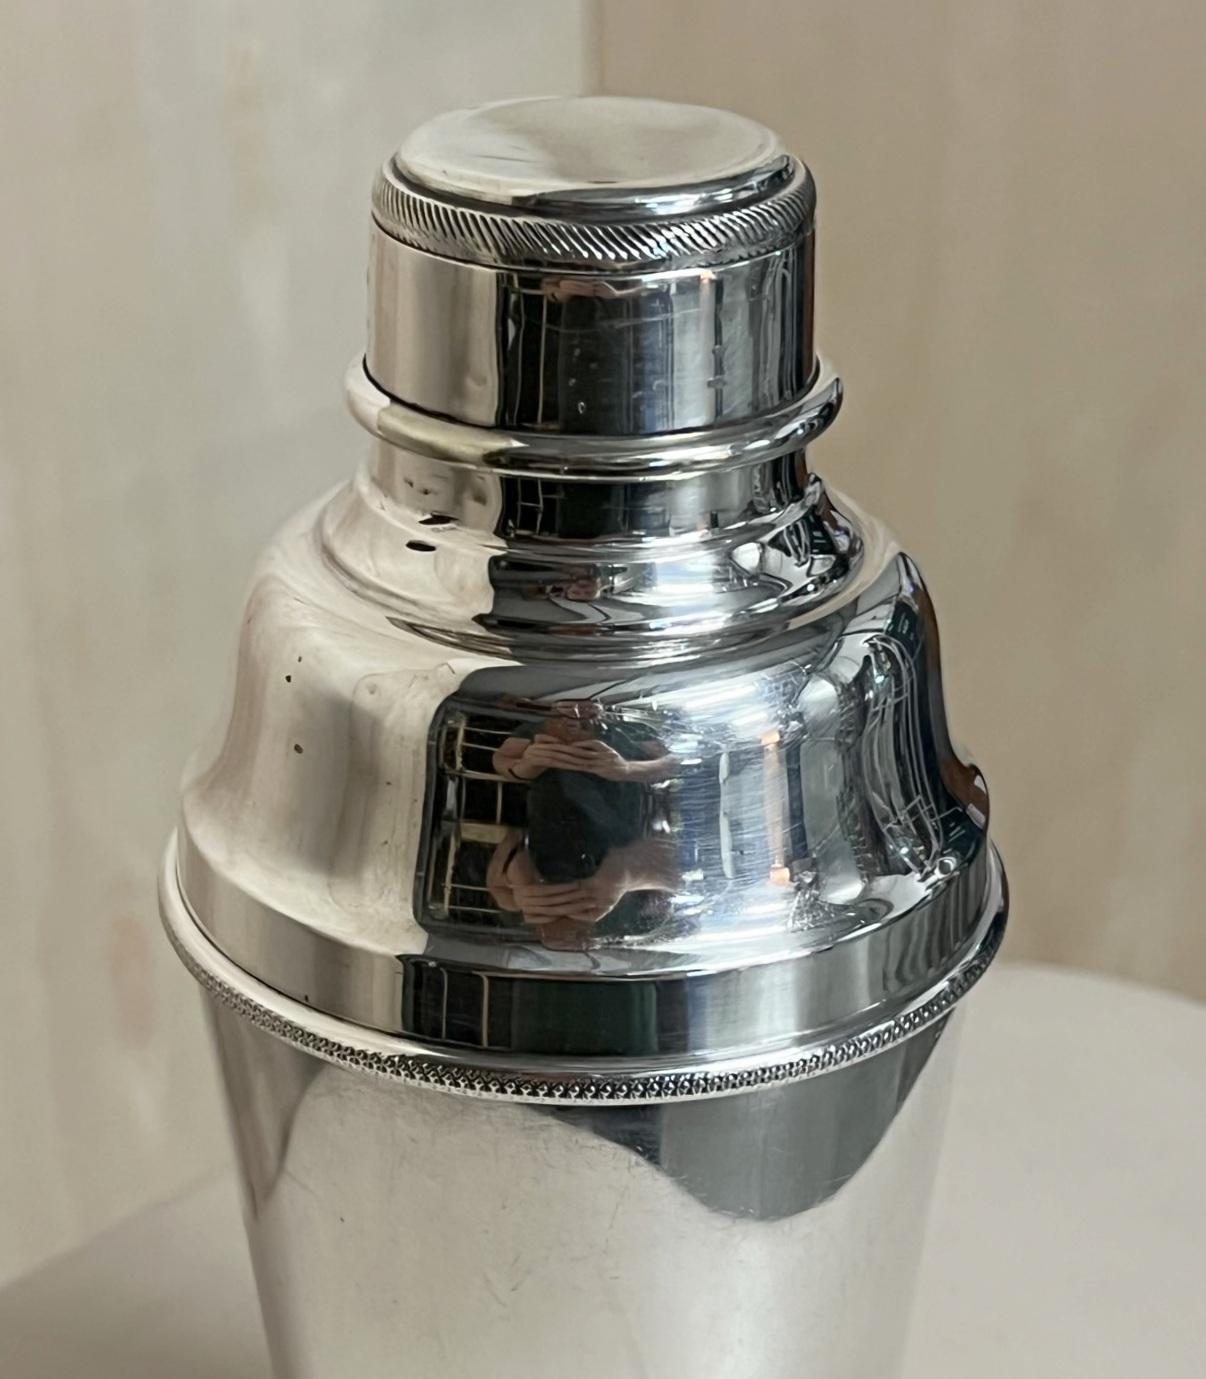 English Antique circa 1920 Art Deco Asprey & Co London Silver Plated Cocktail Shaker For Sale